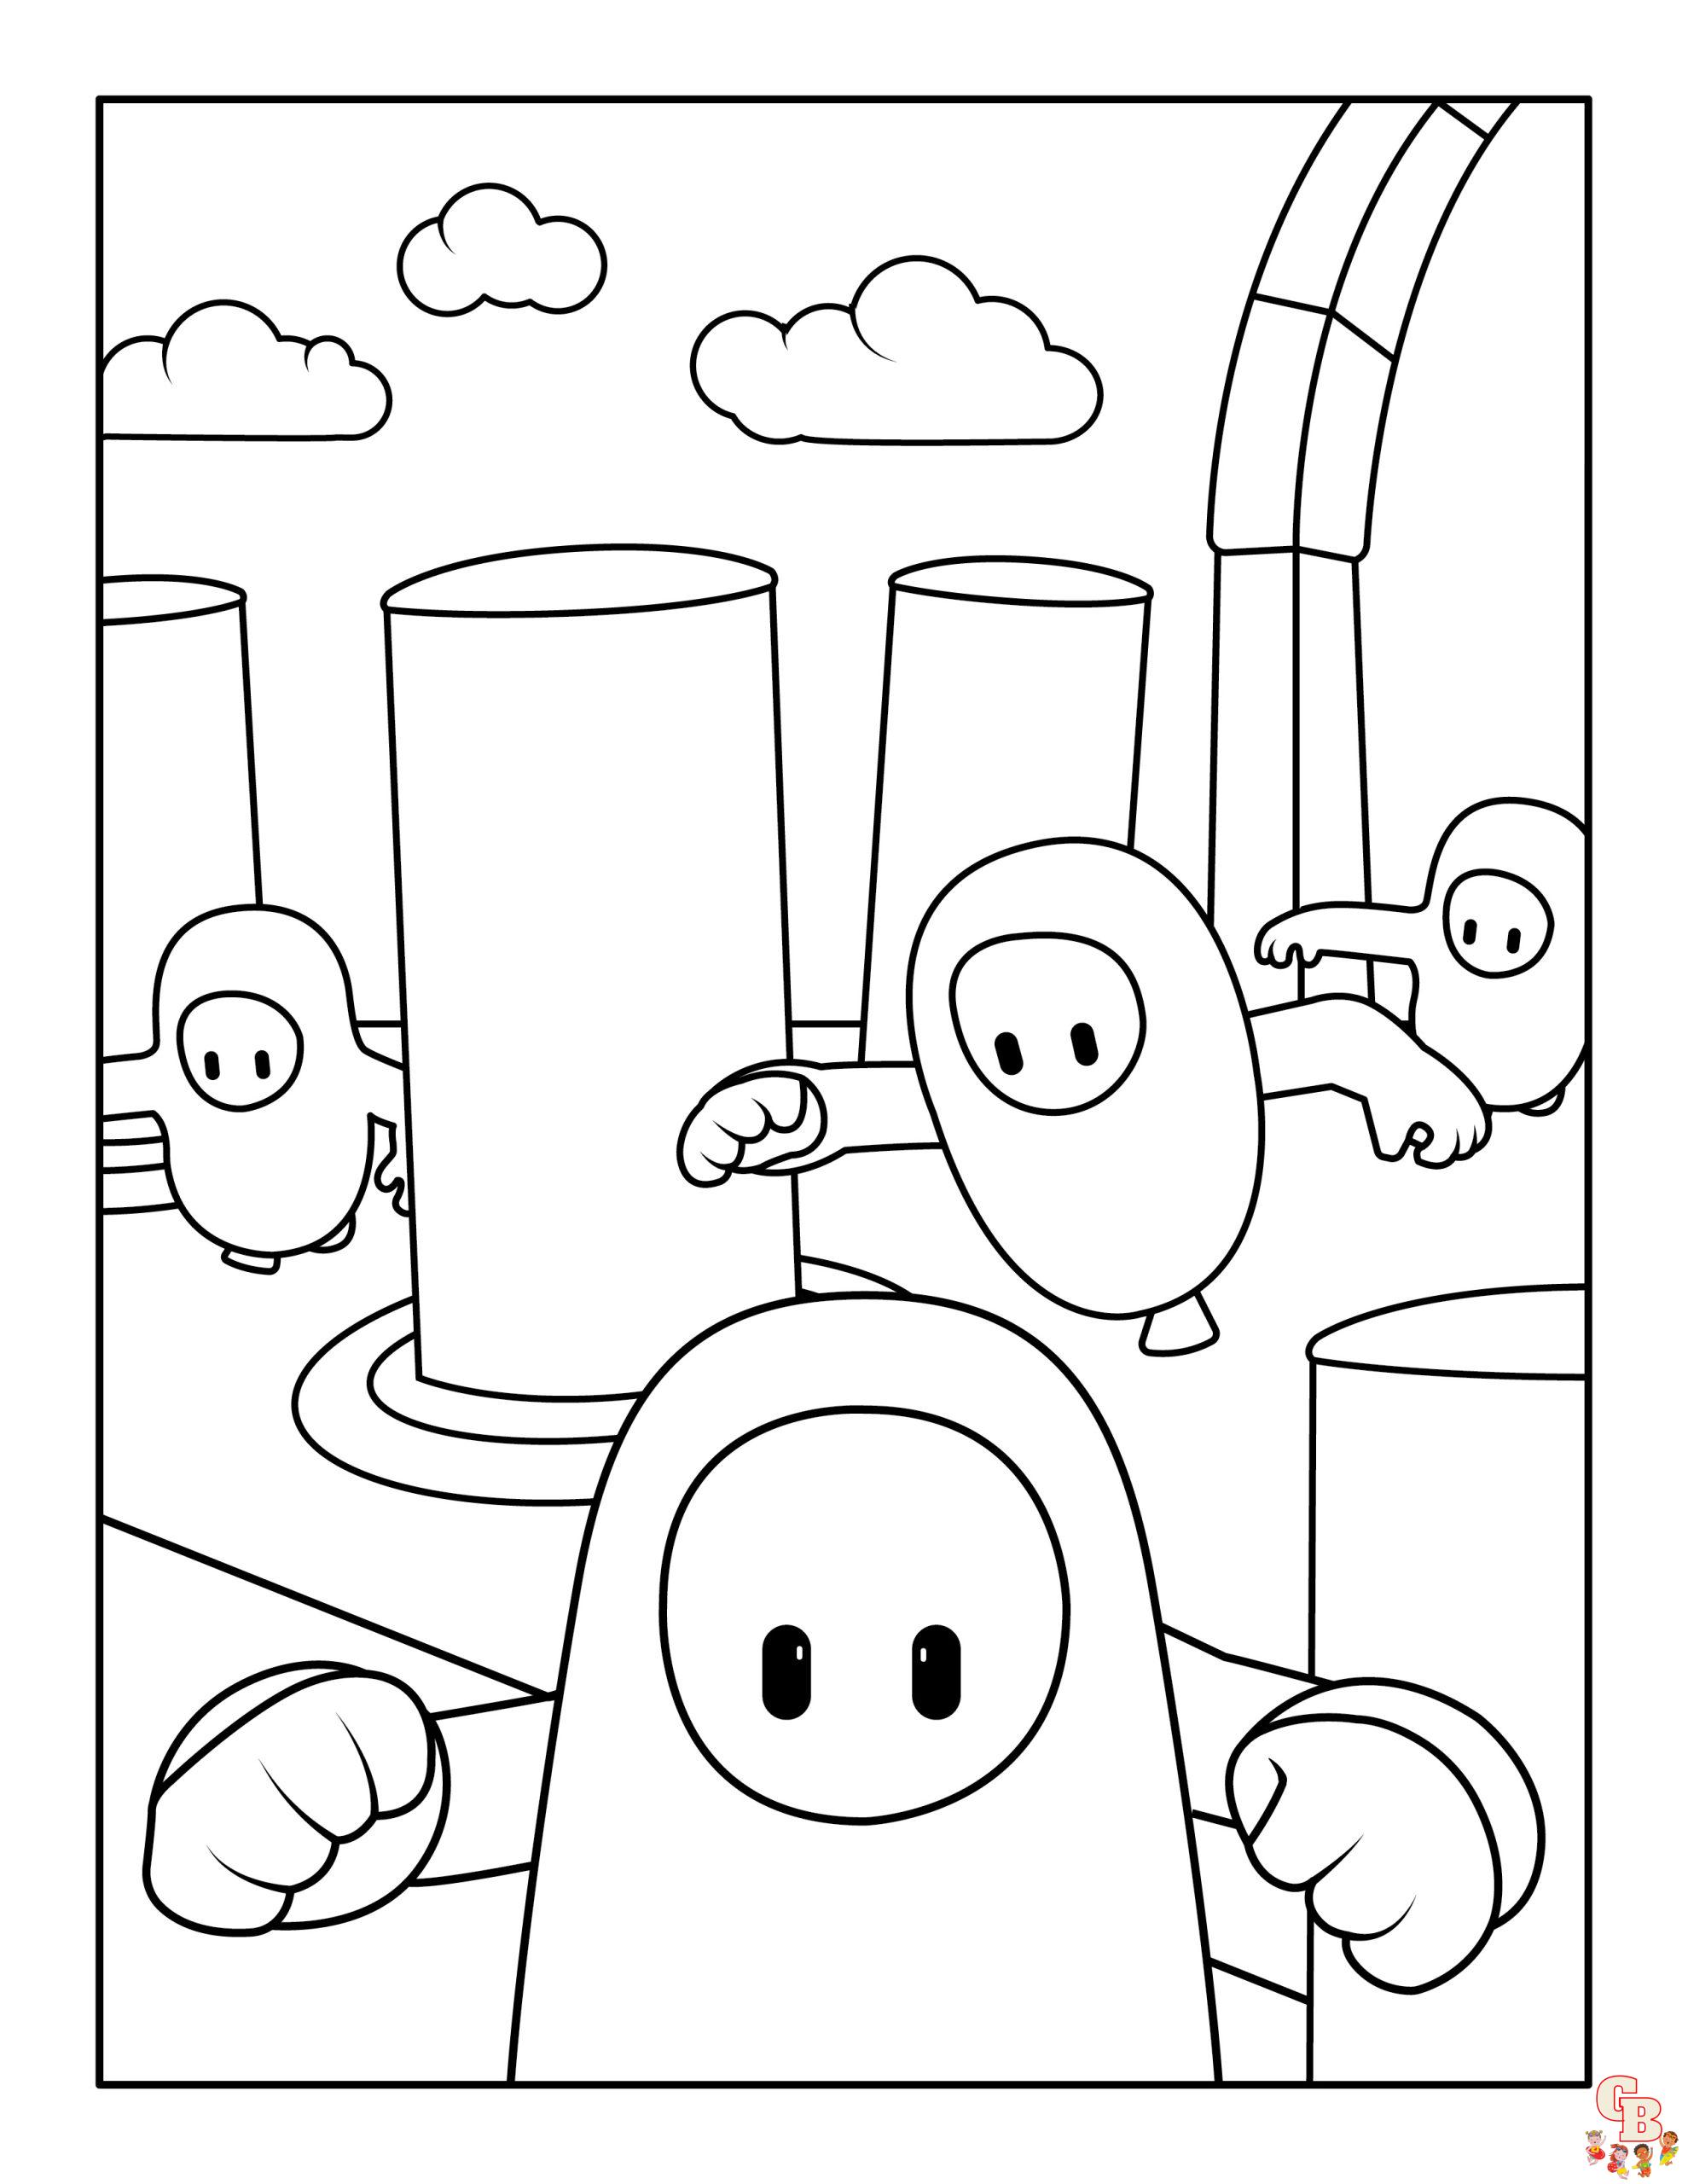 Fun Coloring Pages 2